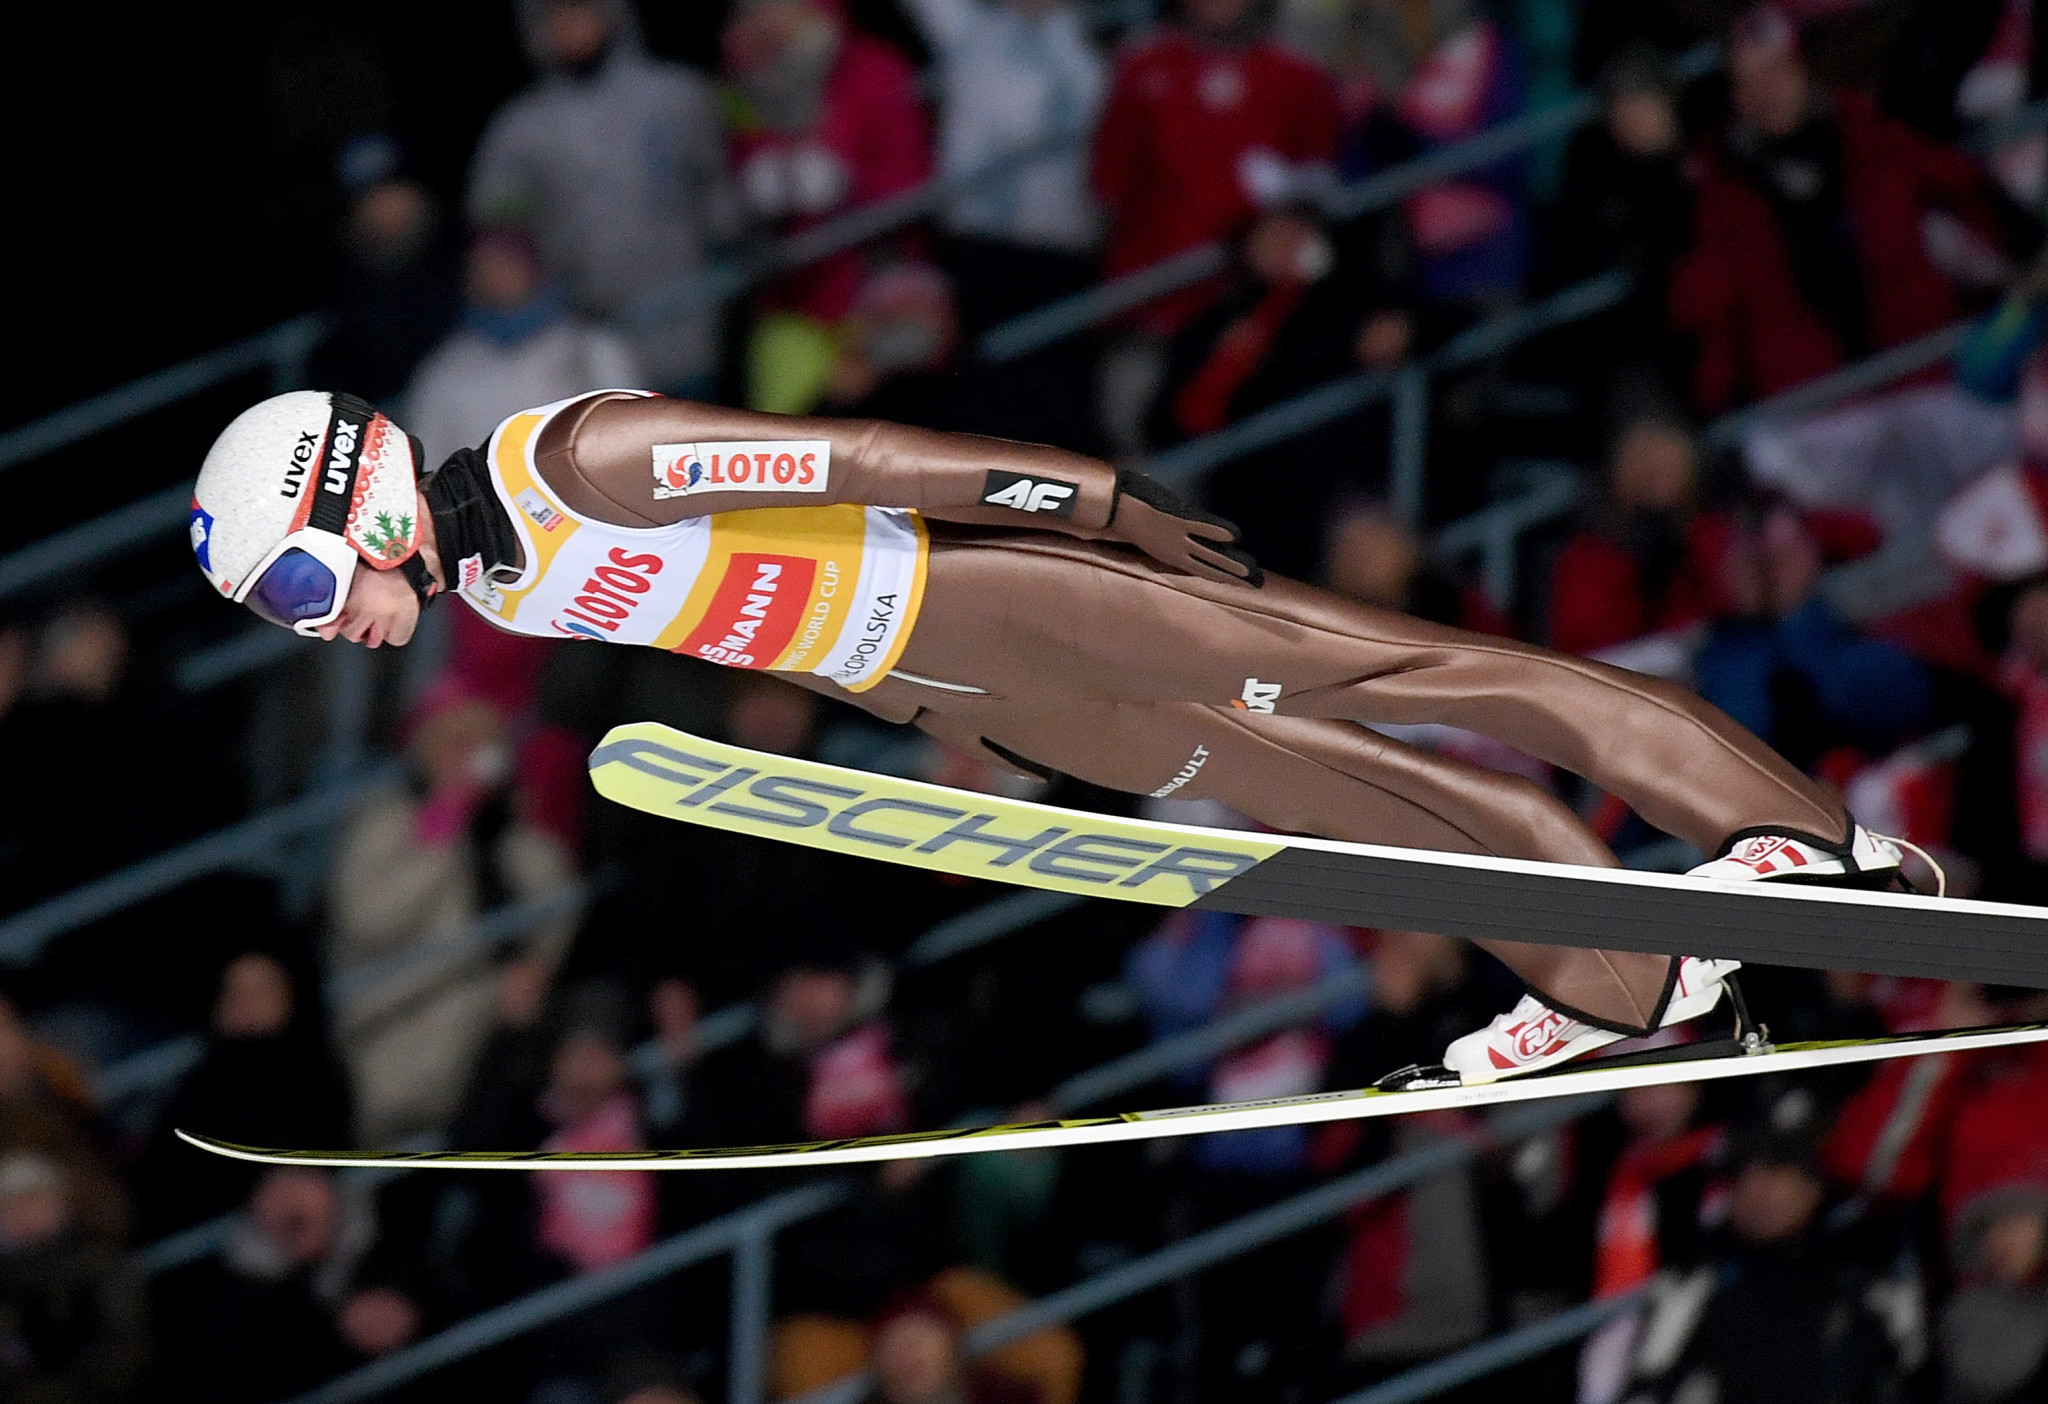 Poland’s Kamil Stoch topped the qualification standings as action began today at the FIS Ski Jumping World Cup in Willingen in Germany ©Getty Images